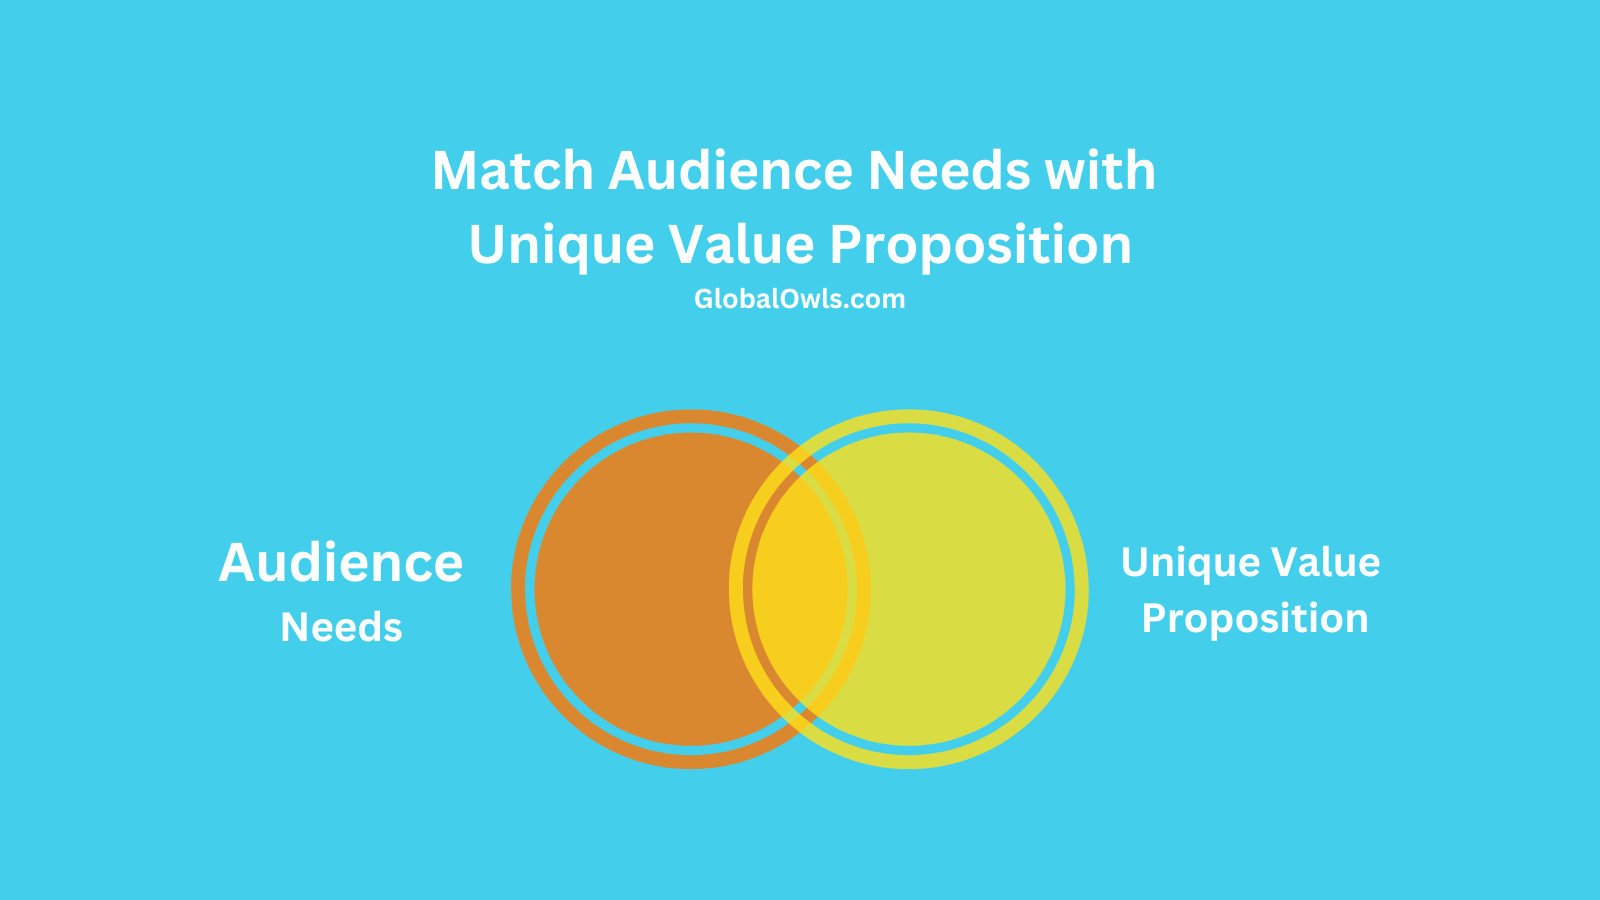 Match Audience Needs with your Unique Value Proposition